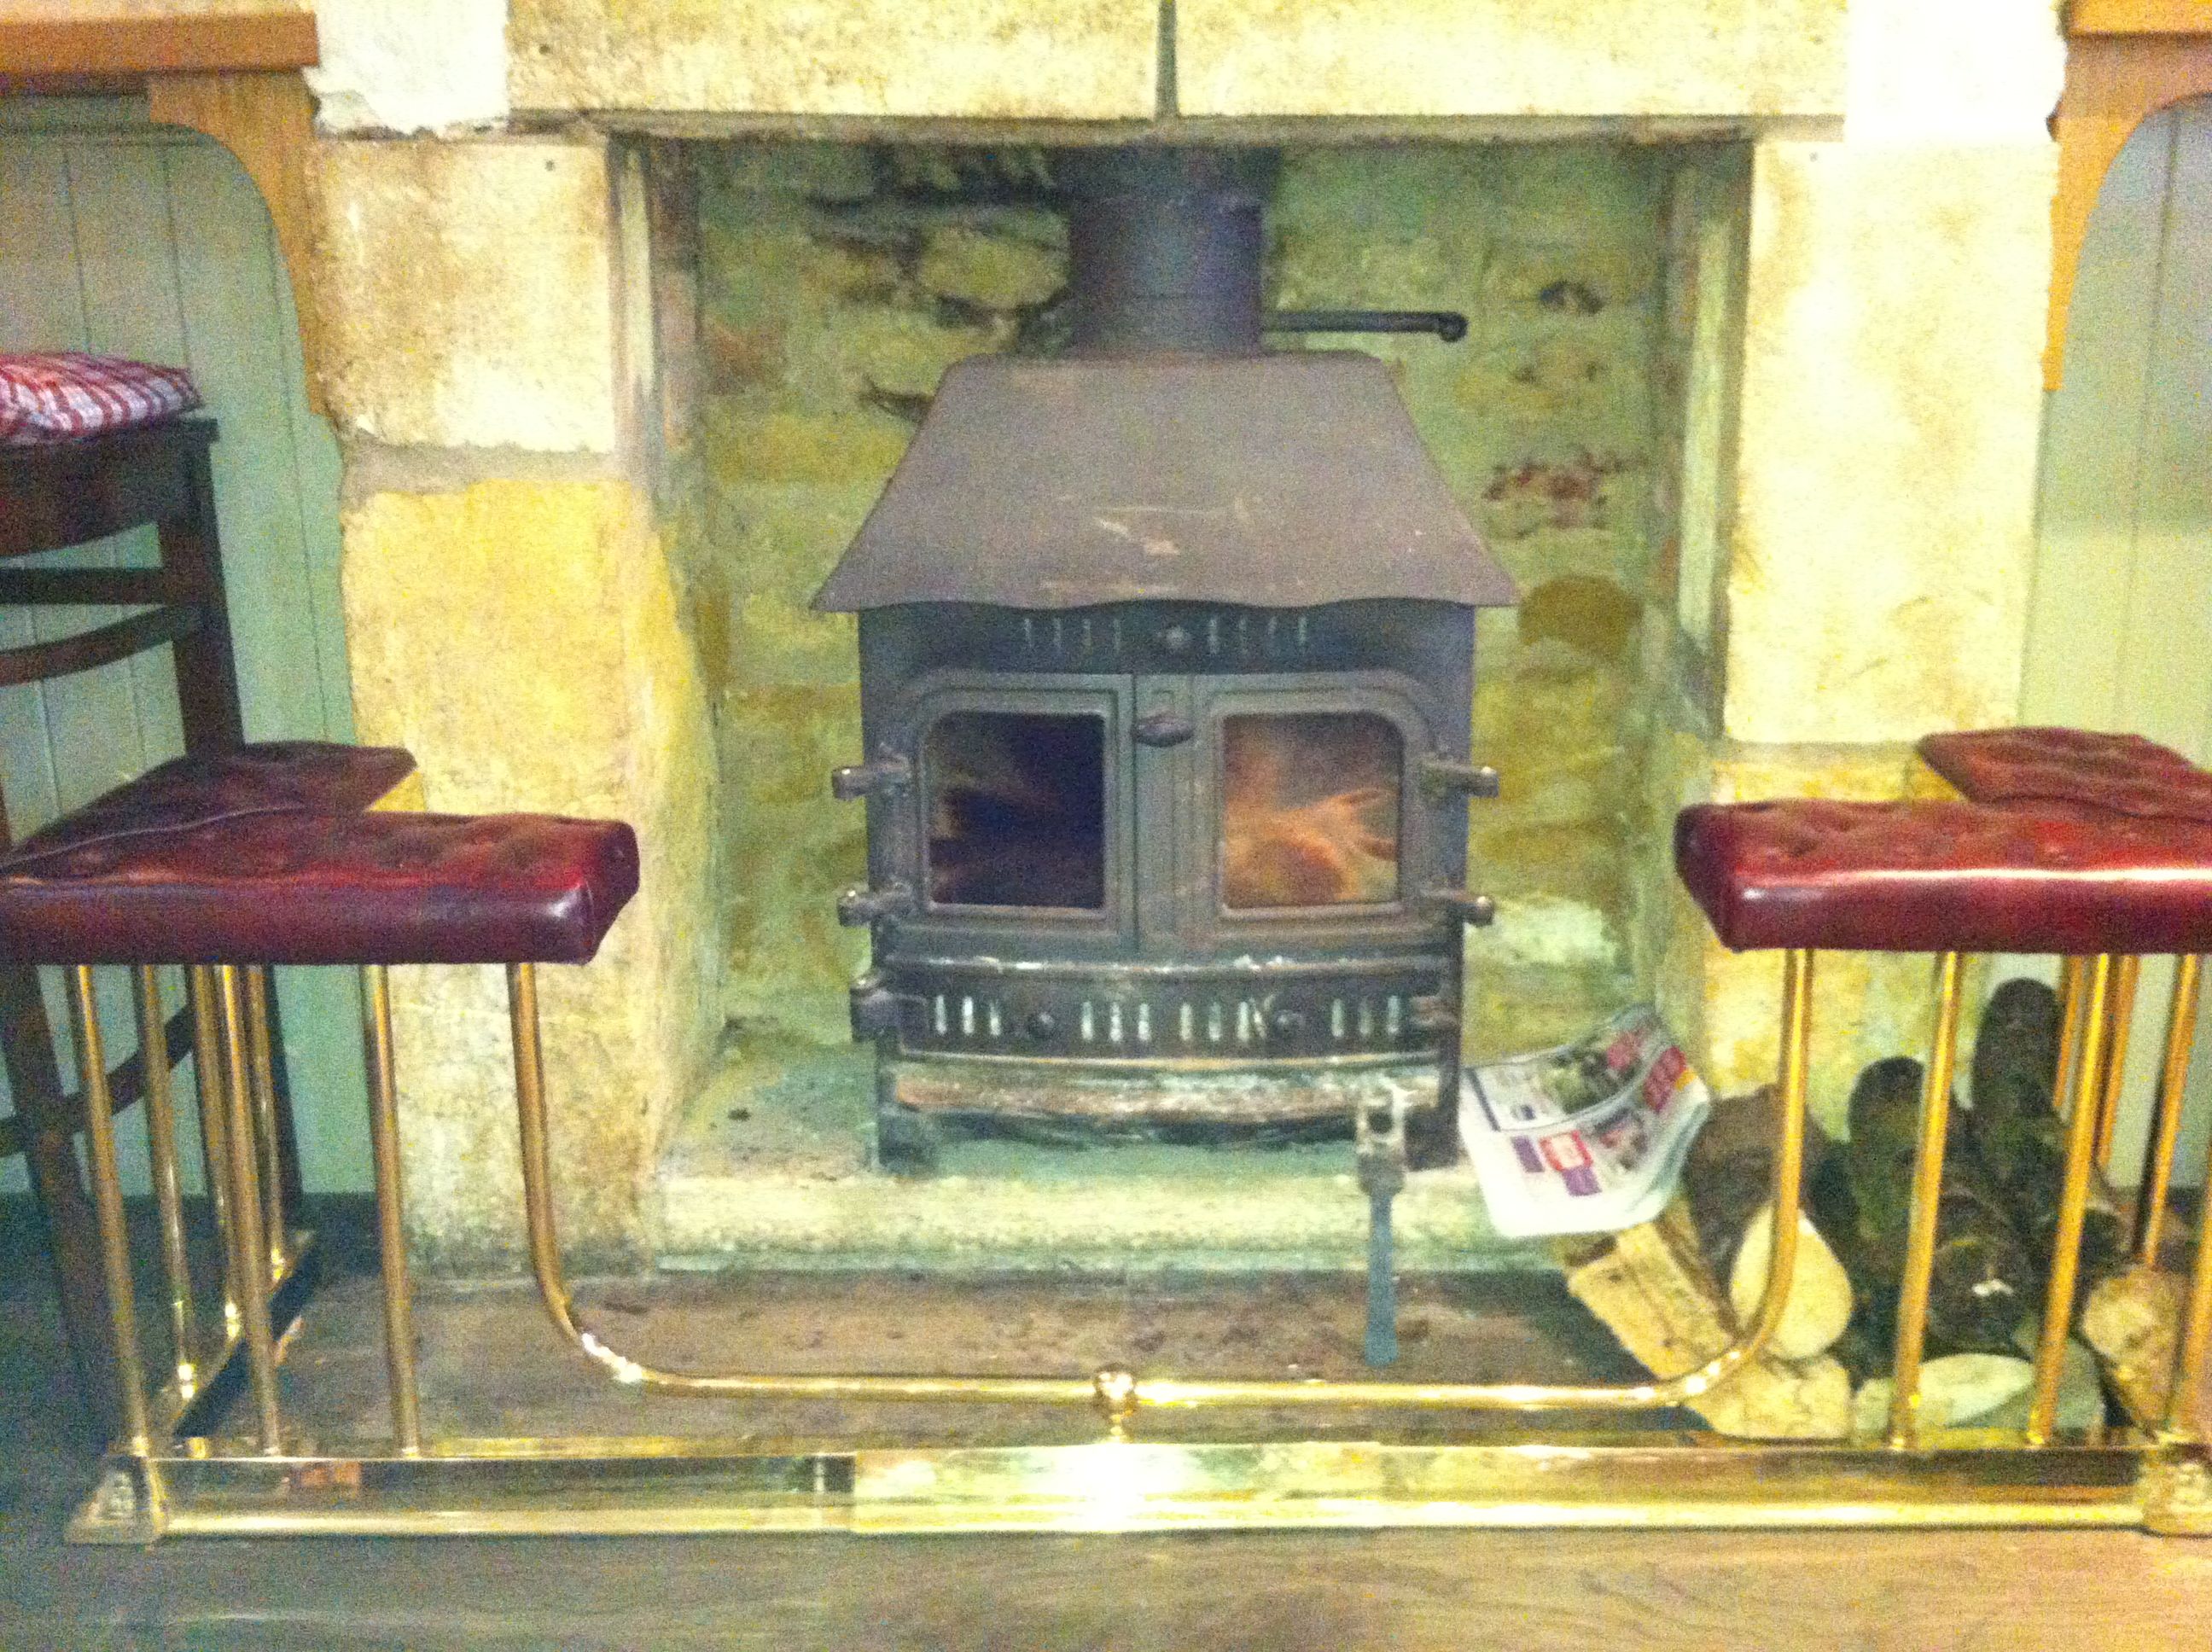 Fireplace Fender Unique From A Pub In Oxfordshire Liked How You Can some